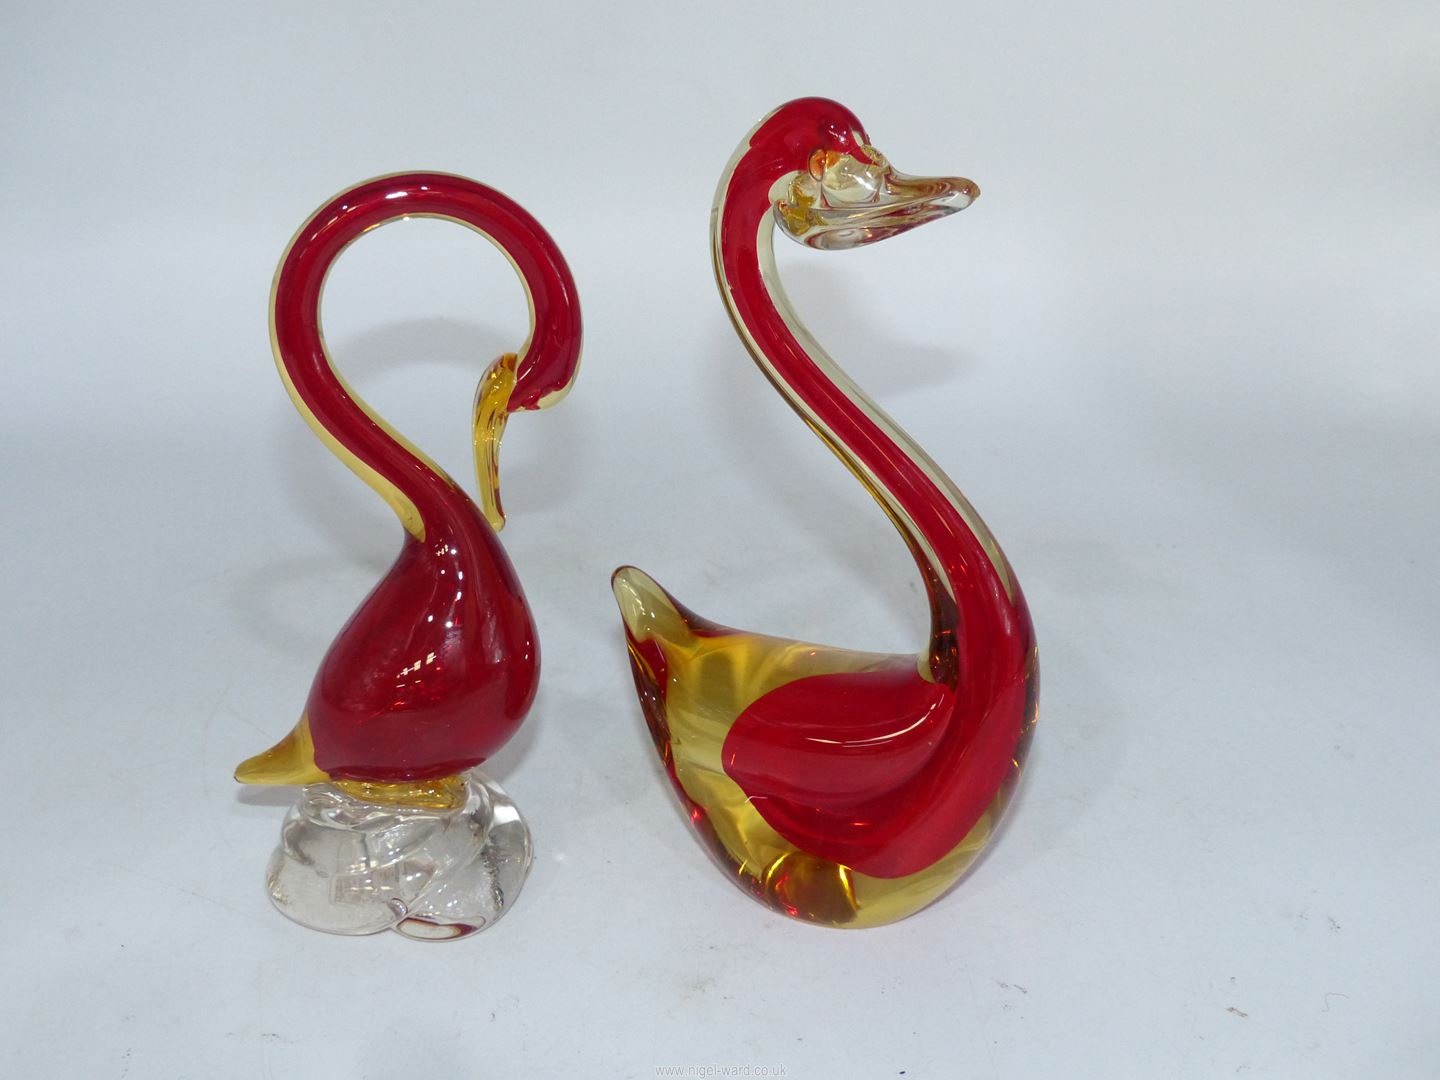 A Murano glass swan with base label "Vetro Artistico Veneziano" in red and cased with lemon - Image 2 of 3